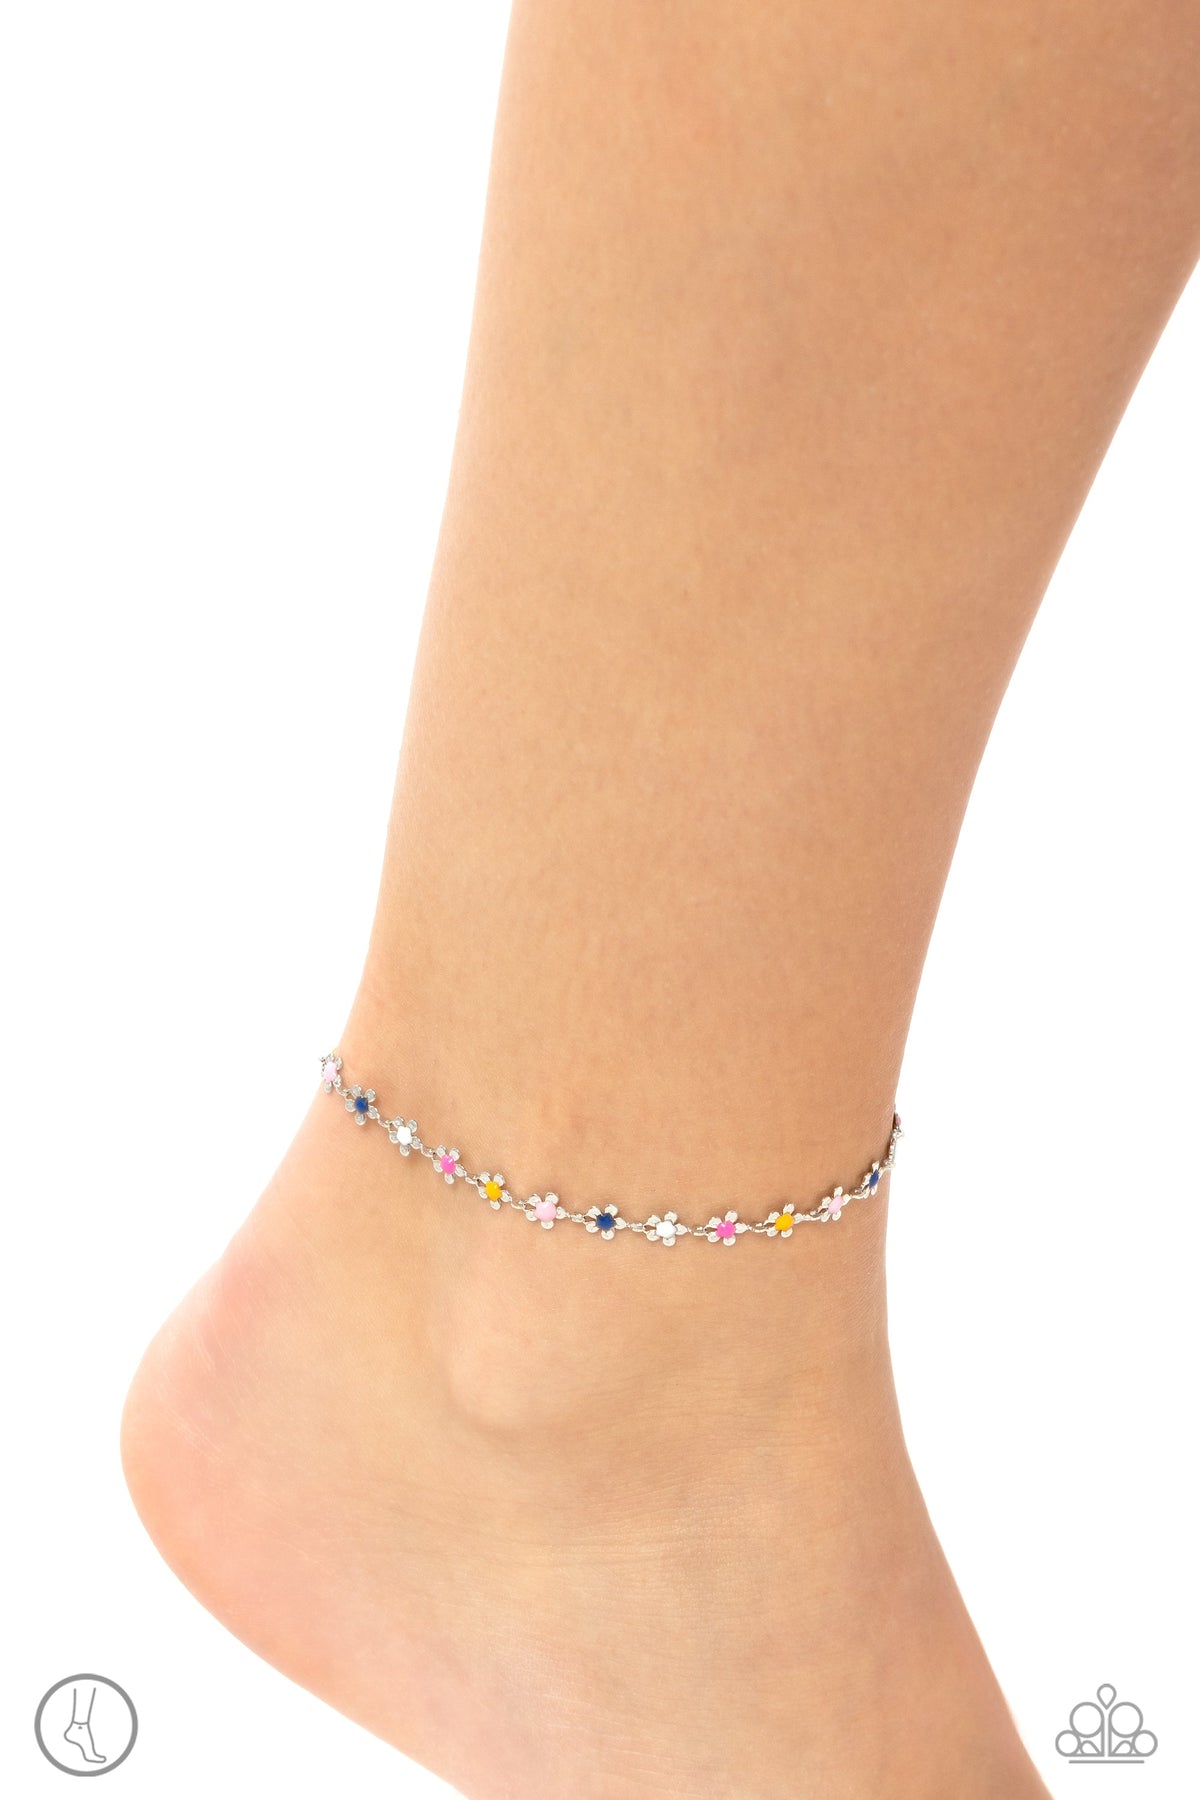 Familiar Florals Multi Flower Anklet - Paparazzi Accessories-on model - CarasShop.com - $5 Jewelry by Cara Jewels